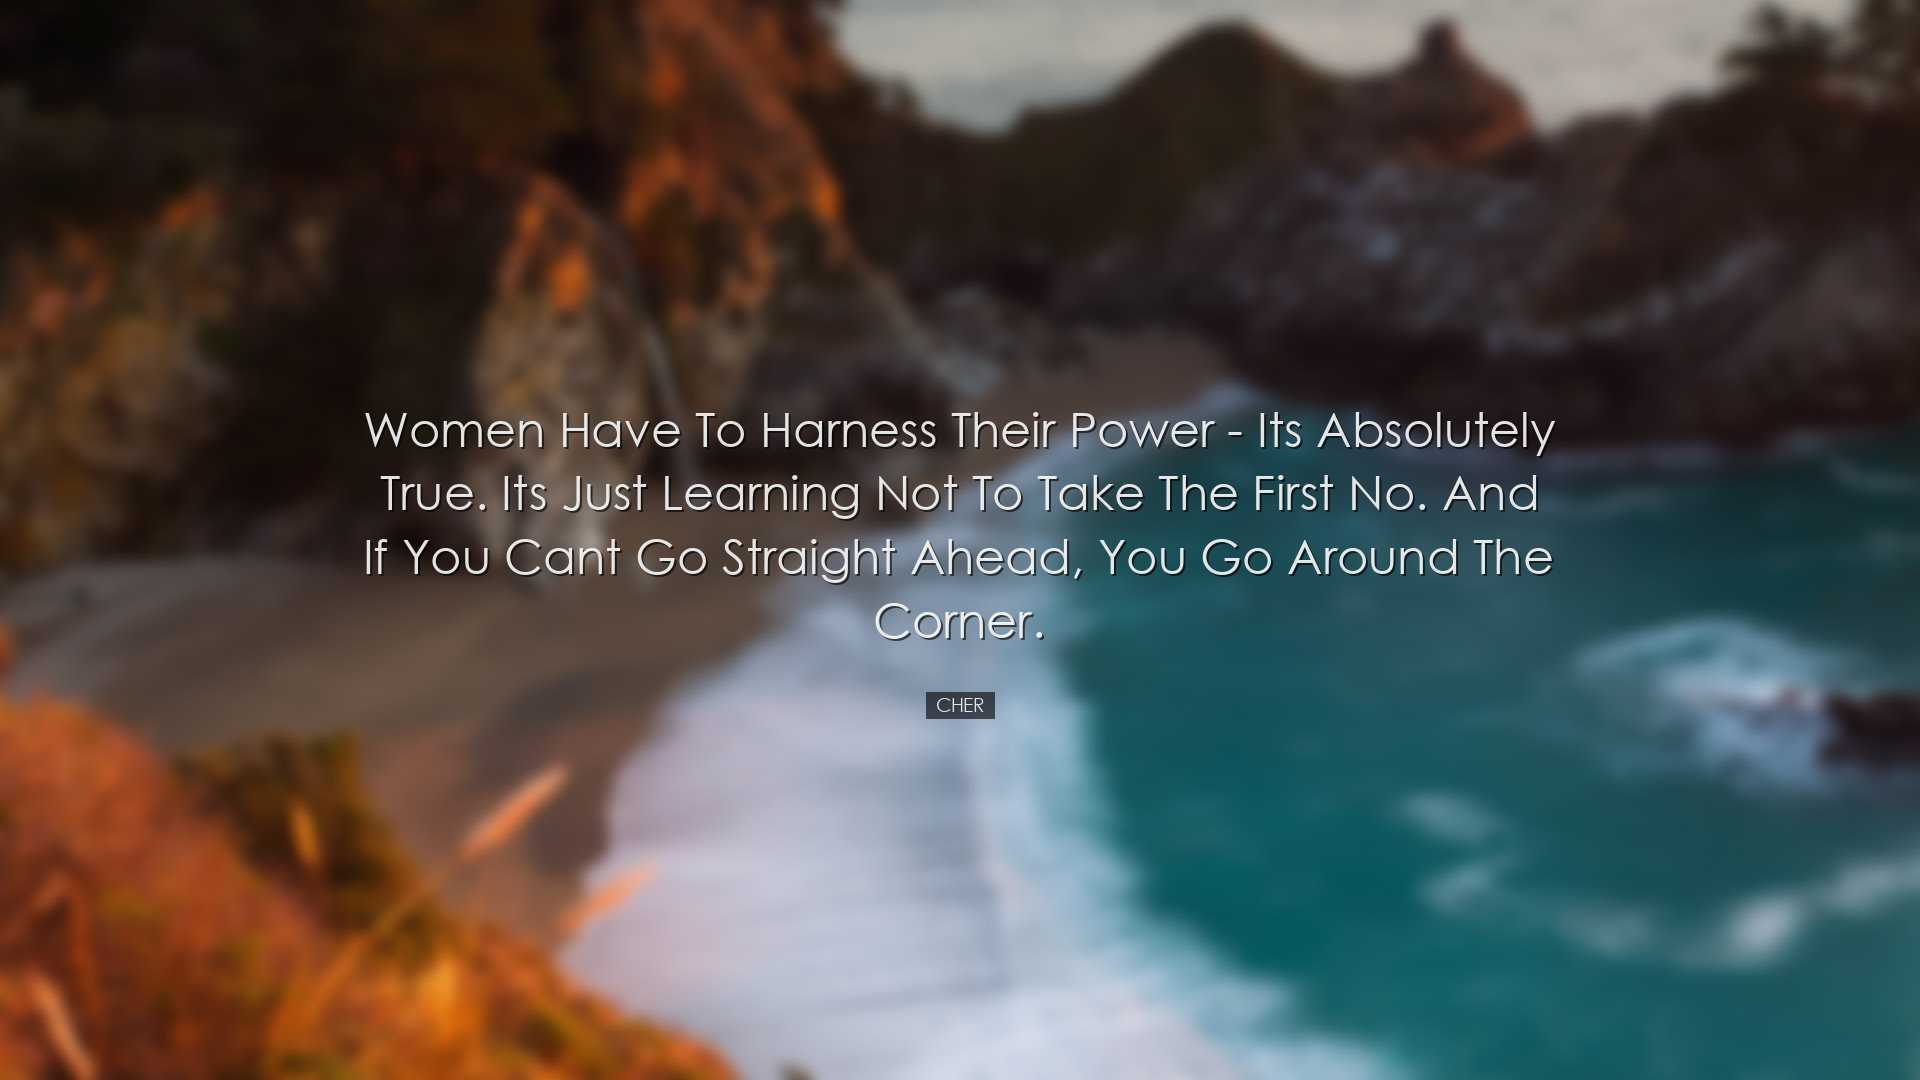 Women have to harness their power - its absolutely true. Its just